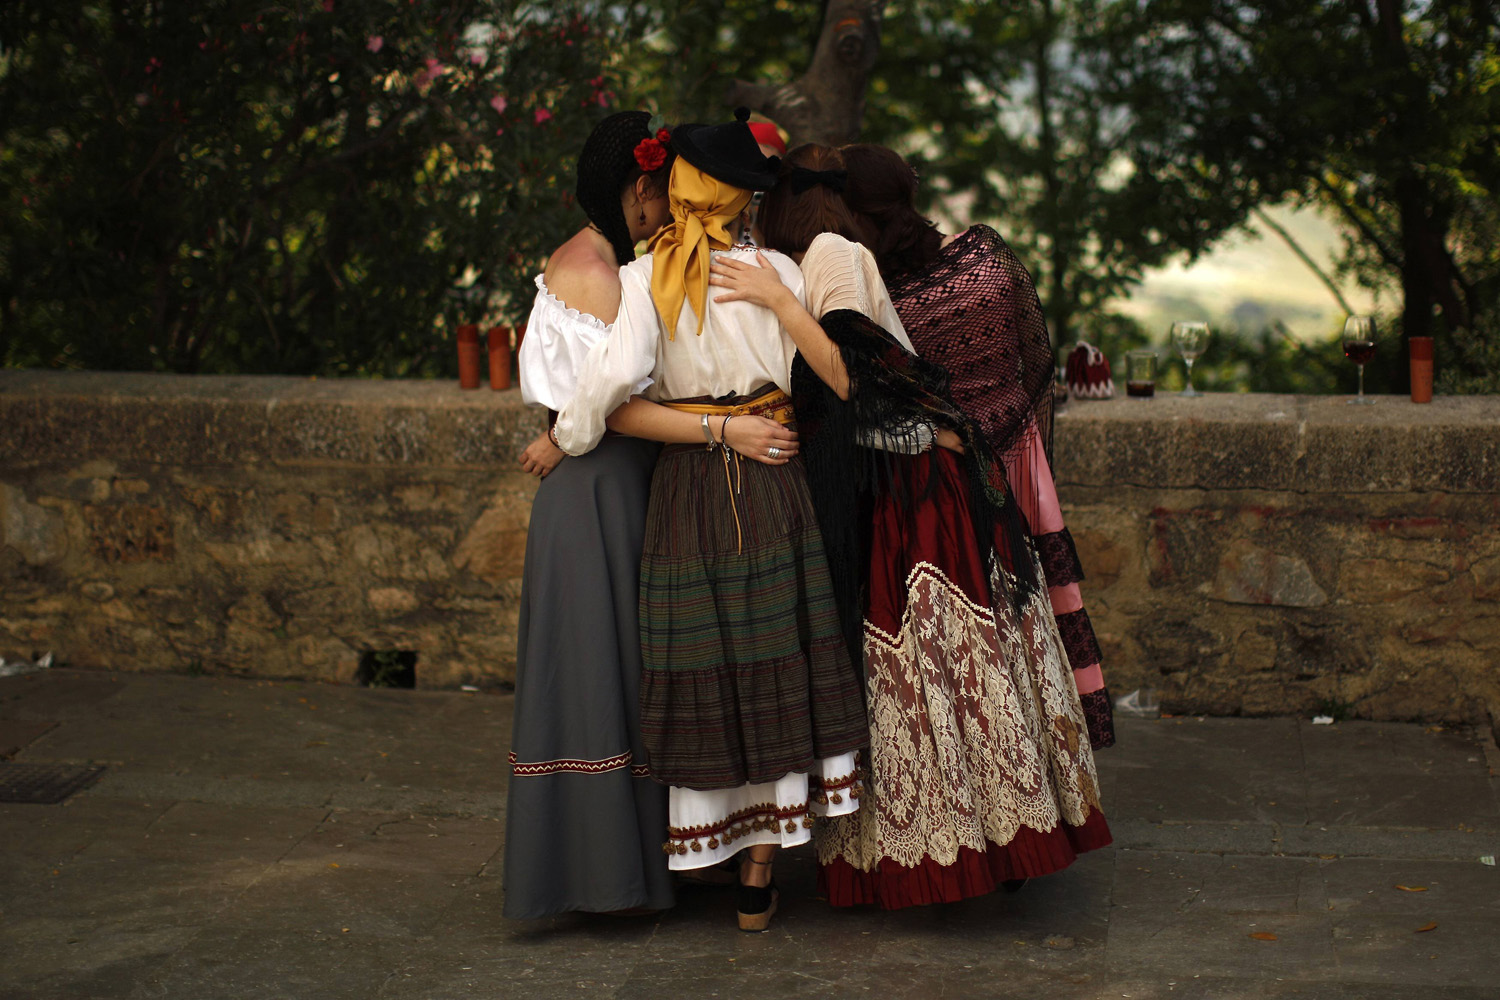 Women wearing traditional costumes are photographed by a friend during the second edition of "Ronda Romantica" (Romantic Ronda) in Ronda